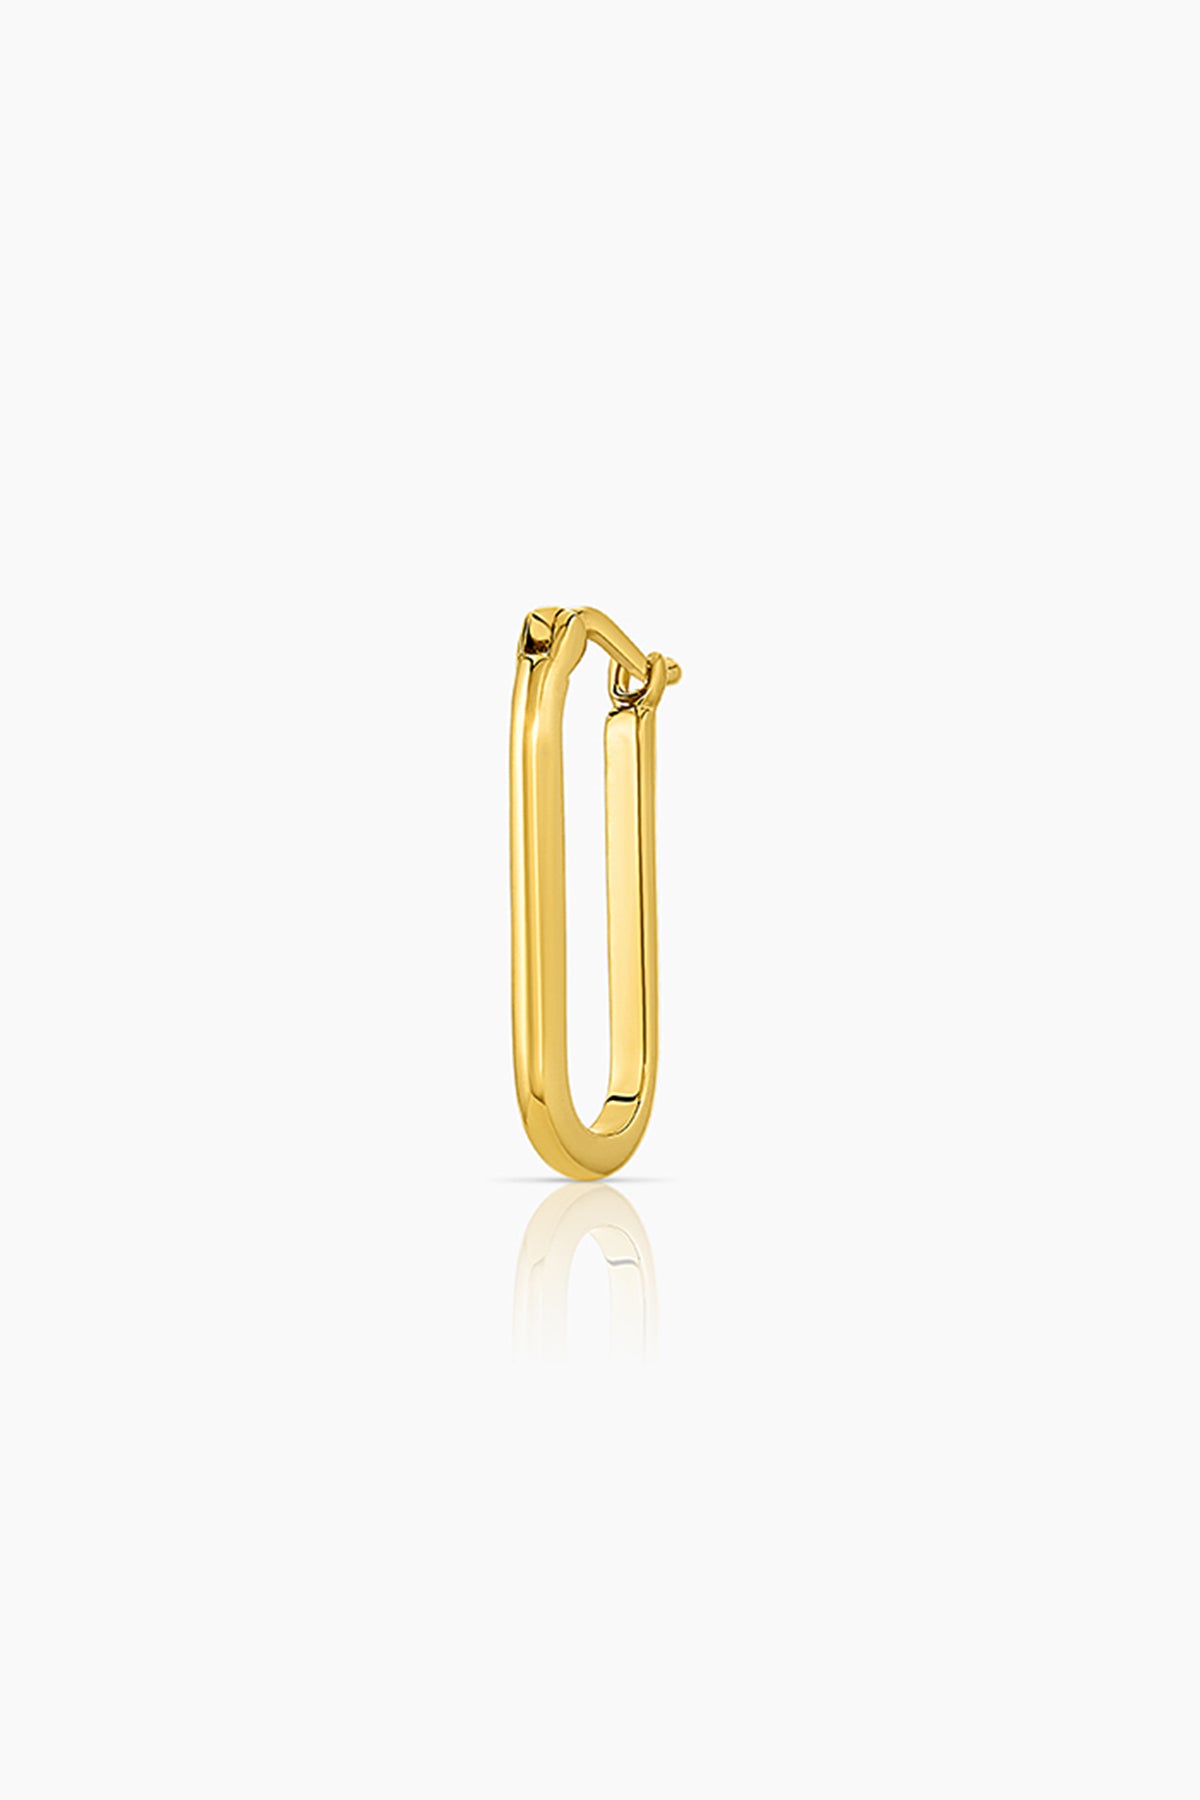   A small yellow gold NADINE ELONGATED HOOPS earring by Thatch. 